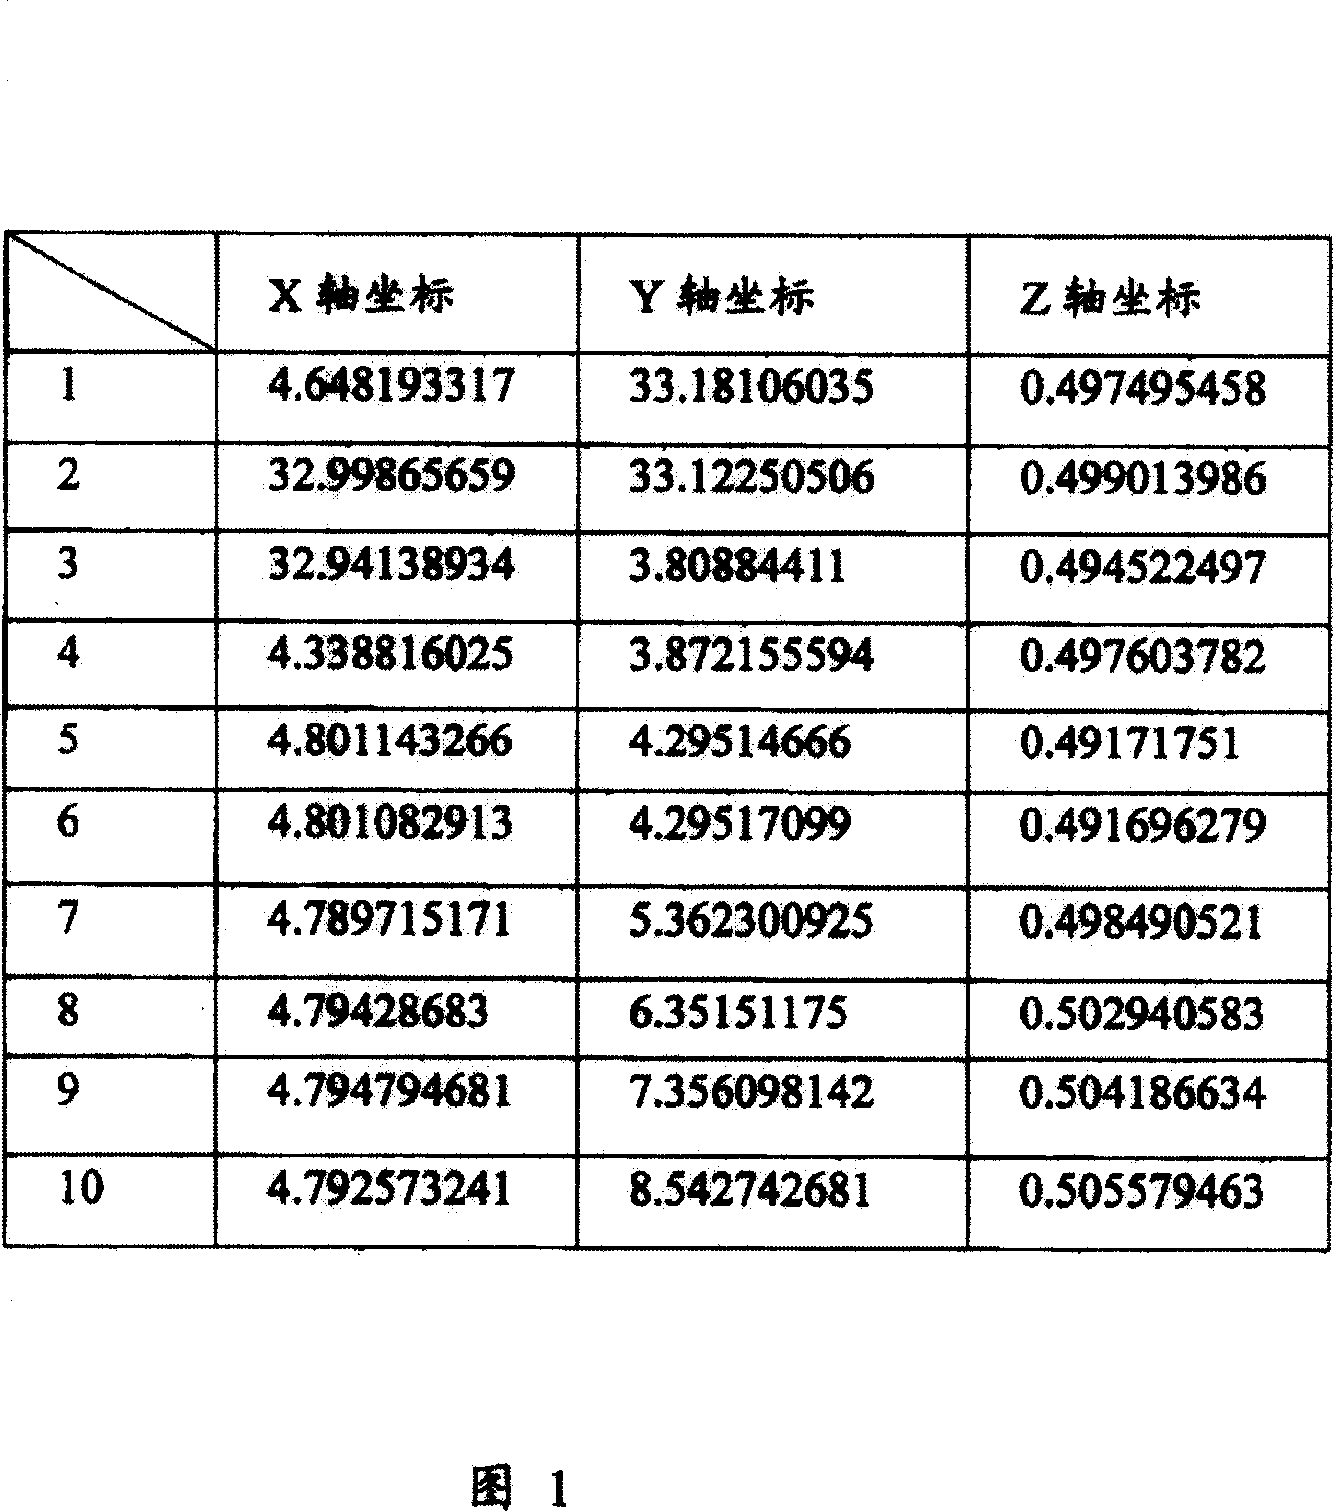 Straight-line degree analytical system and method